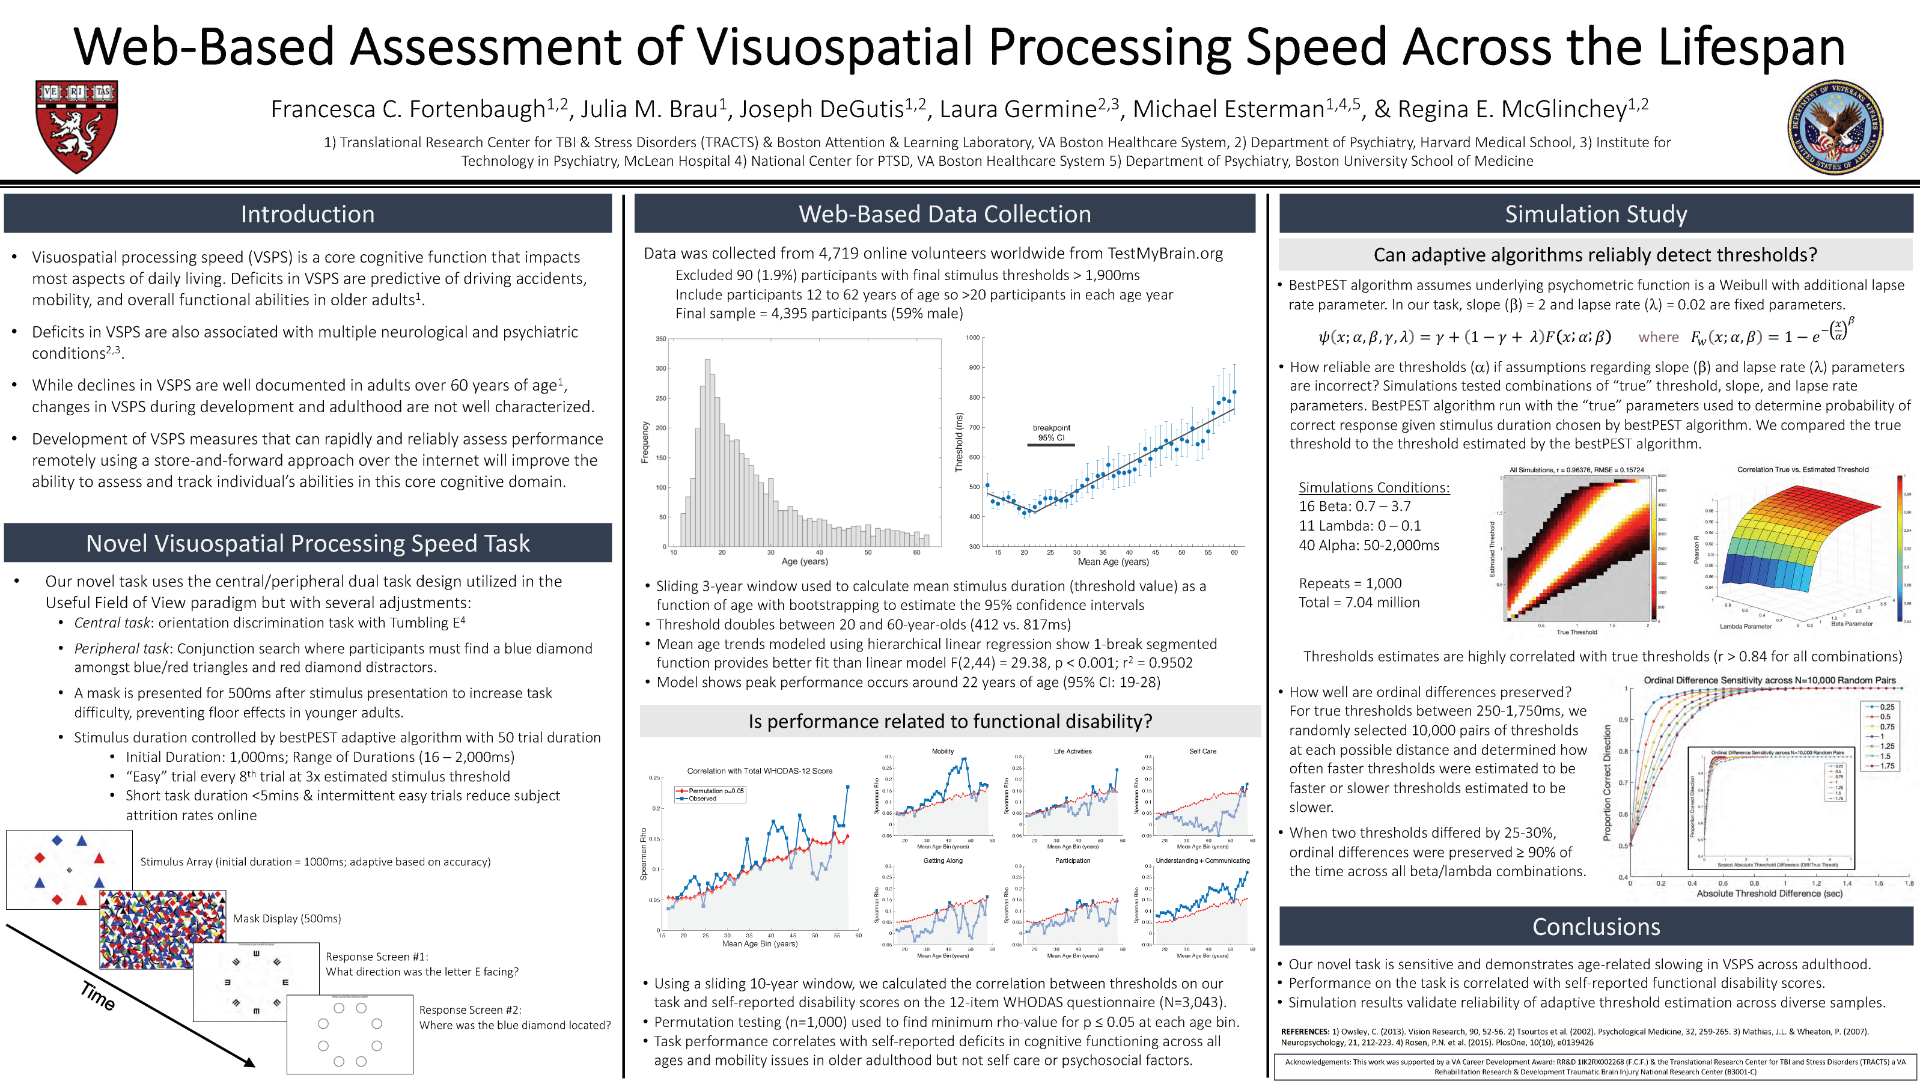 Web-Based Assessment of Visuospatial Processing Speed Across the Lifespan